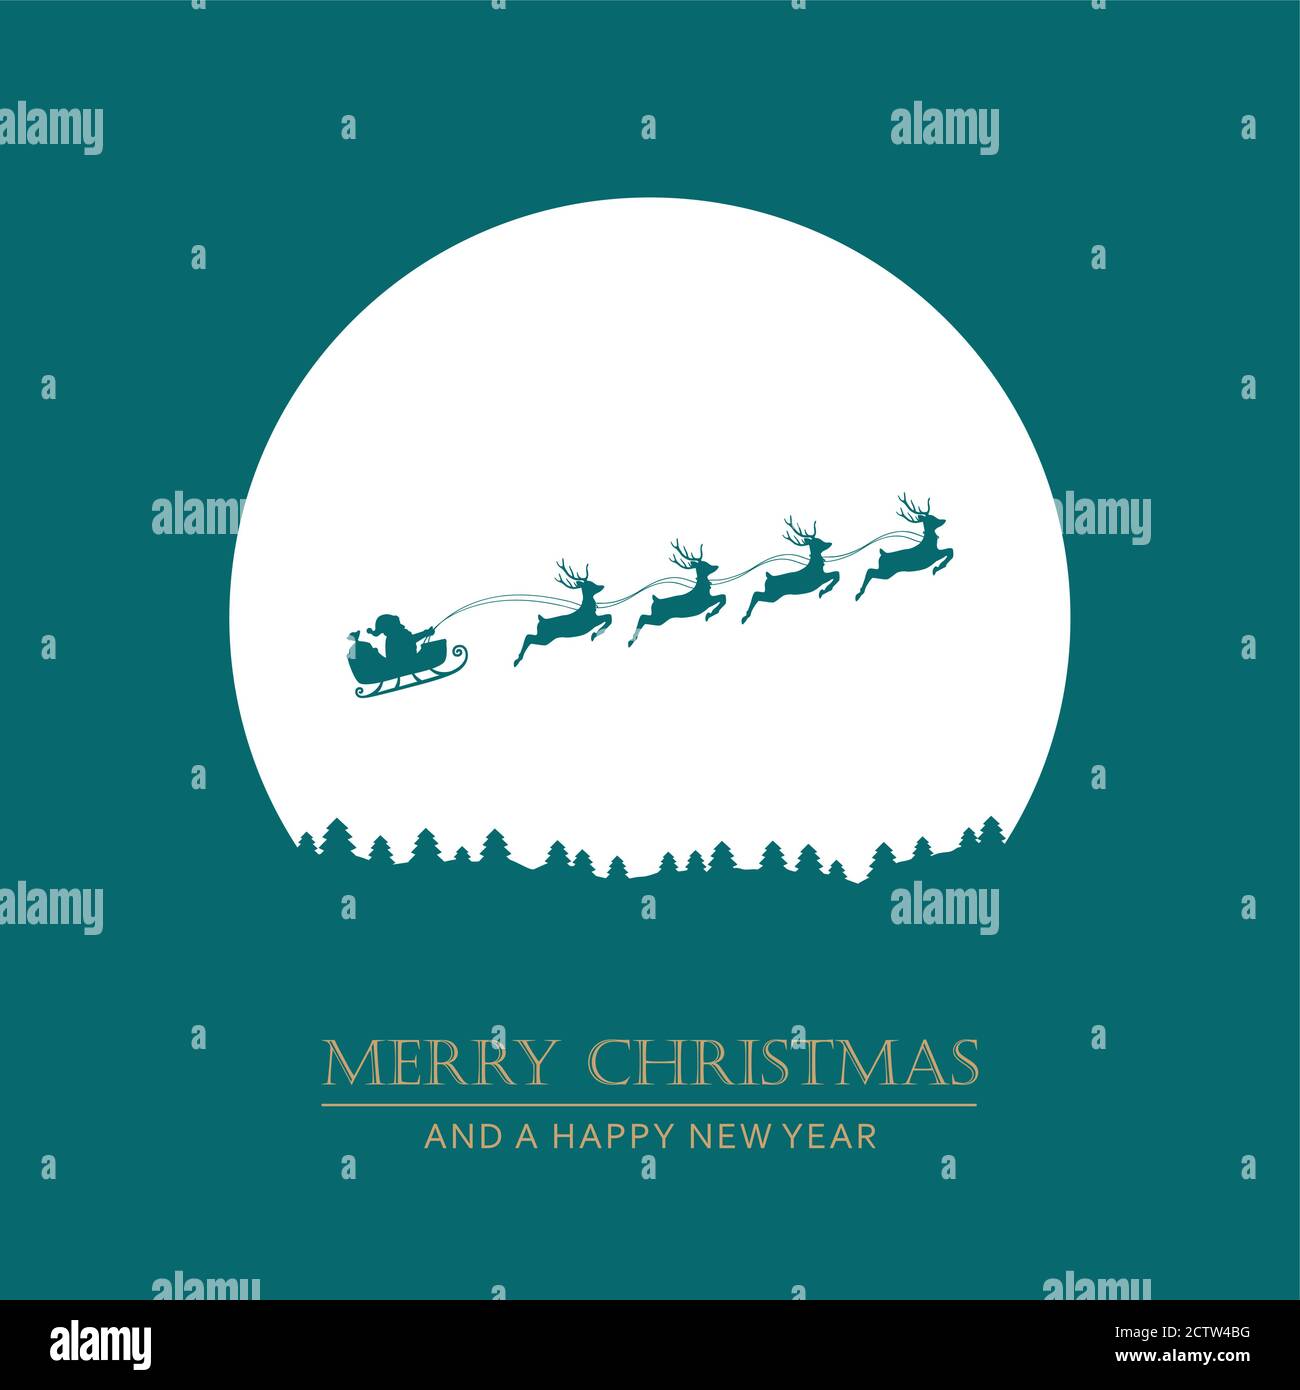 christmas winter banner with santa sleigh and reindeer vector illustration EPS10 Stock Vector